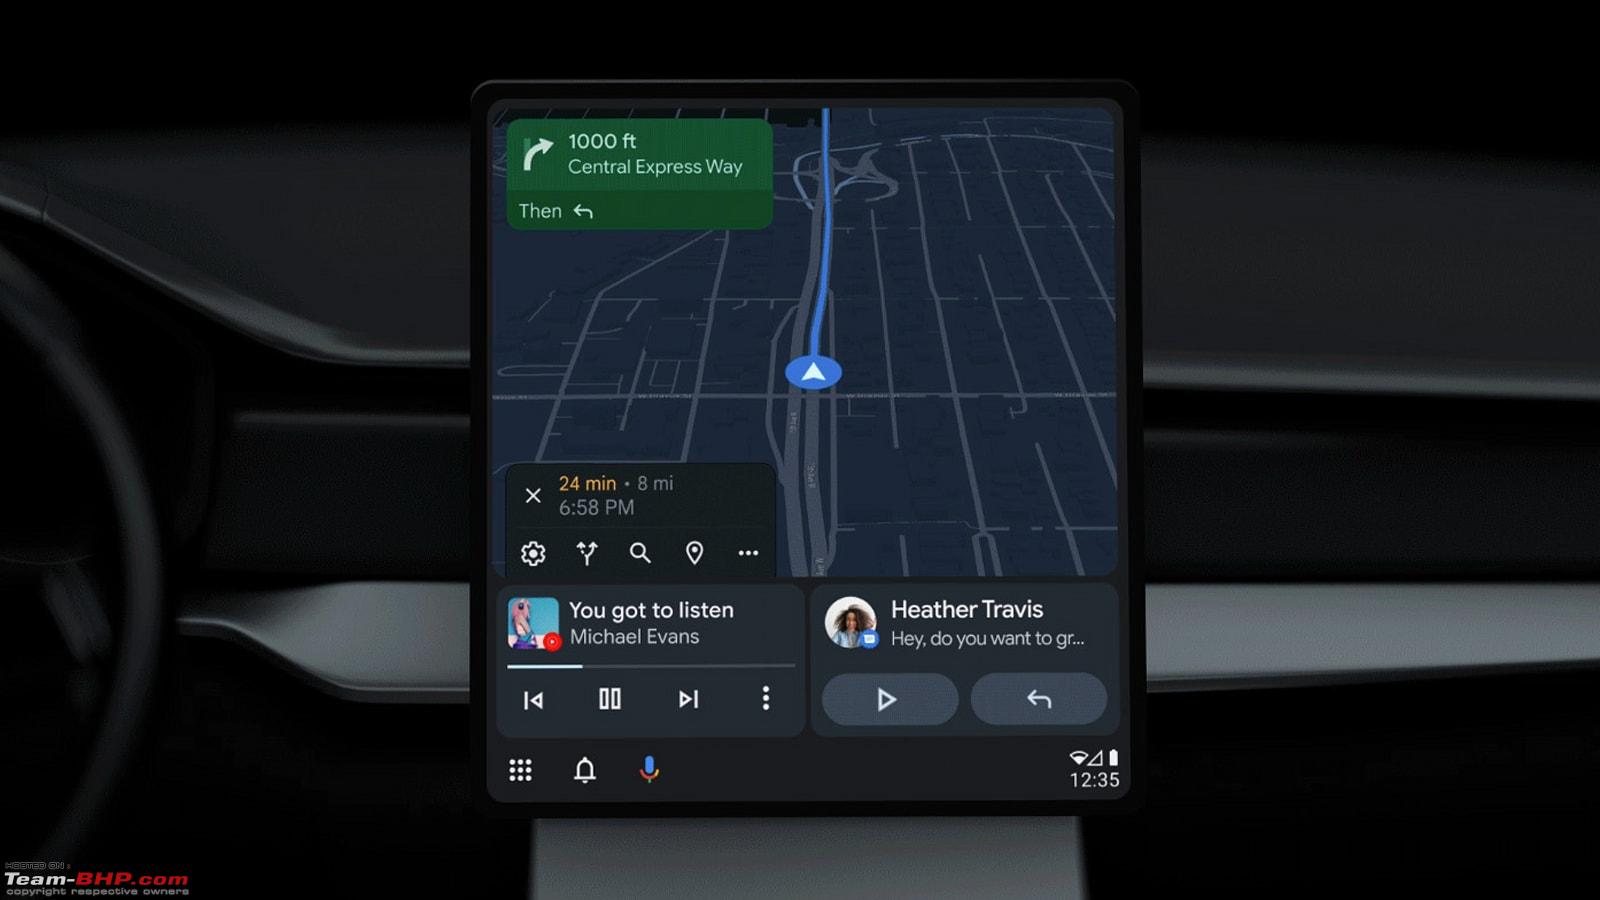 https://www.team-bhp.com/forum/attachments/car-entertainment/2308957d1652787341-android-auto-updated-fit-all-vehicle-screens-also-gets-new-ui-split-screen-interface-androidautoupdate1.jpg